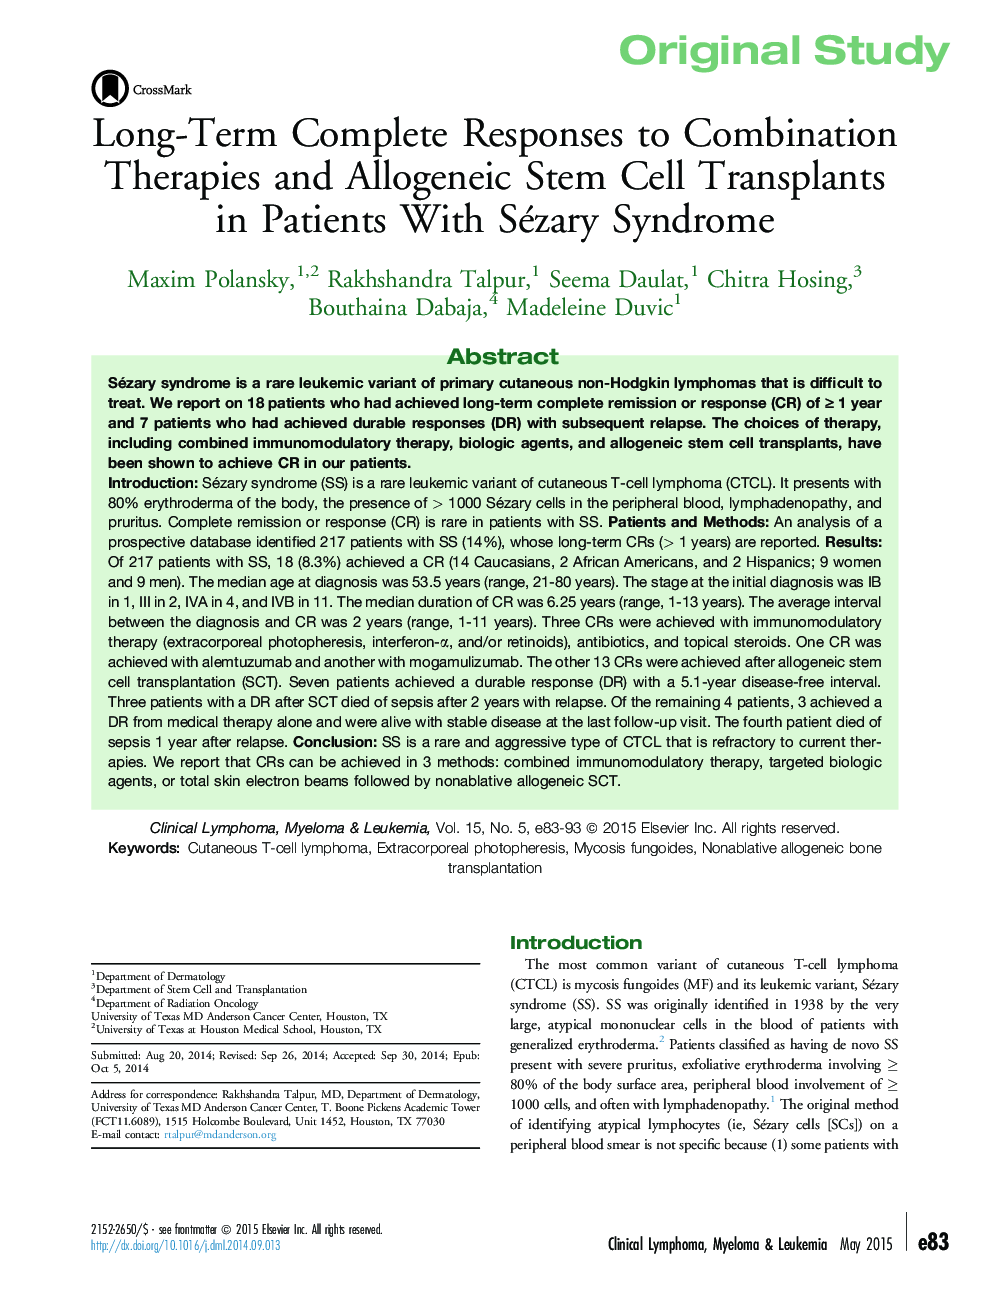 Long-Term Complete Responses to Combination Therapies and Allogeneic Stem Cell Transplants in Patients With Sézary Syndrome